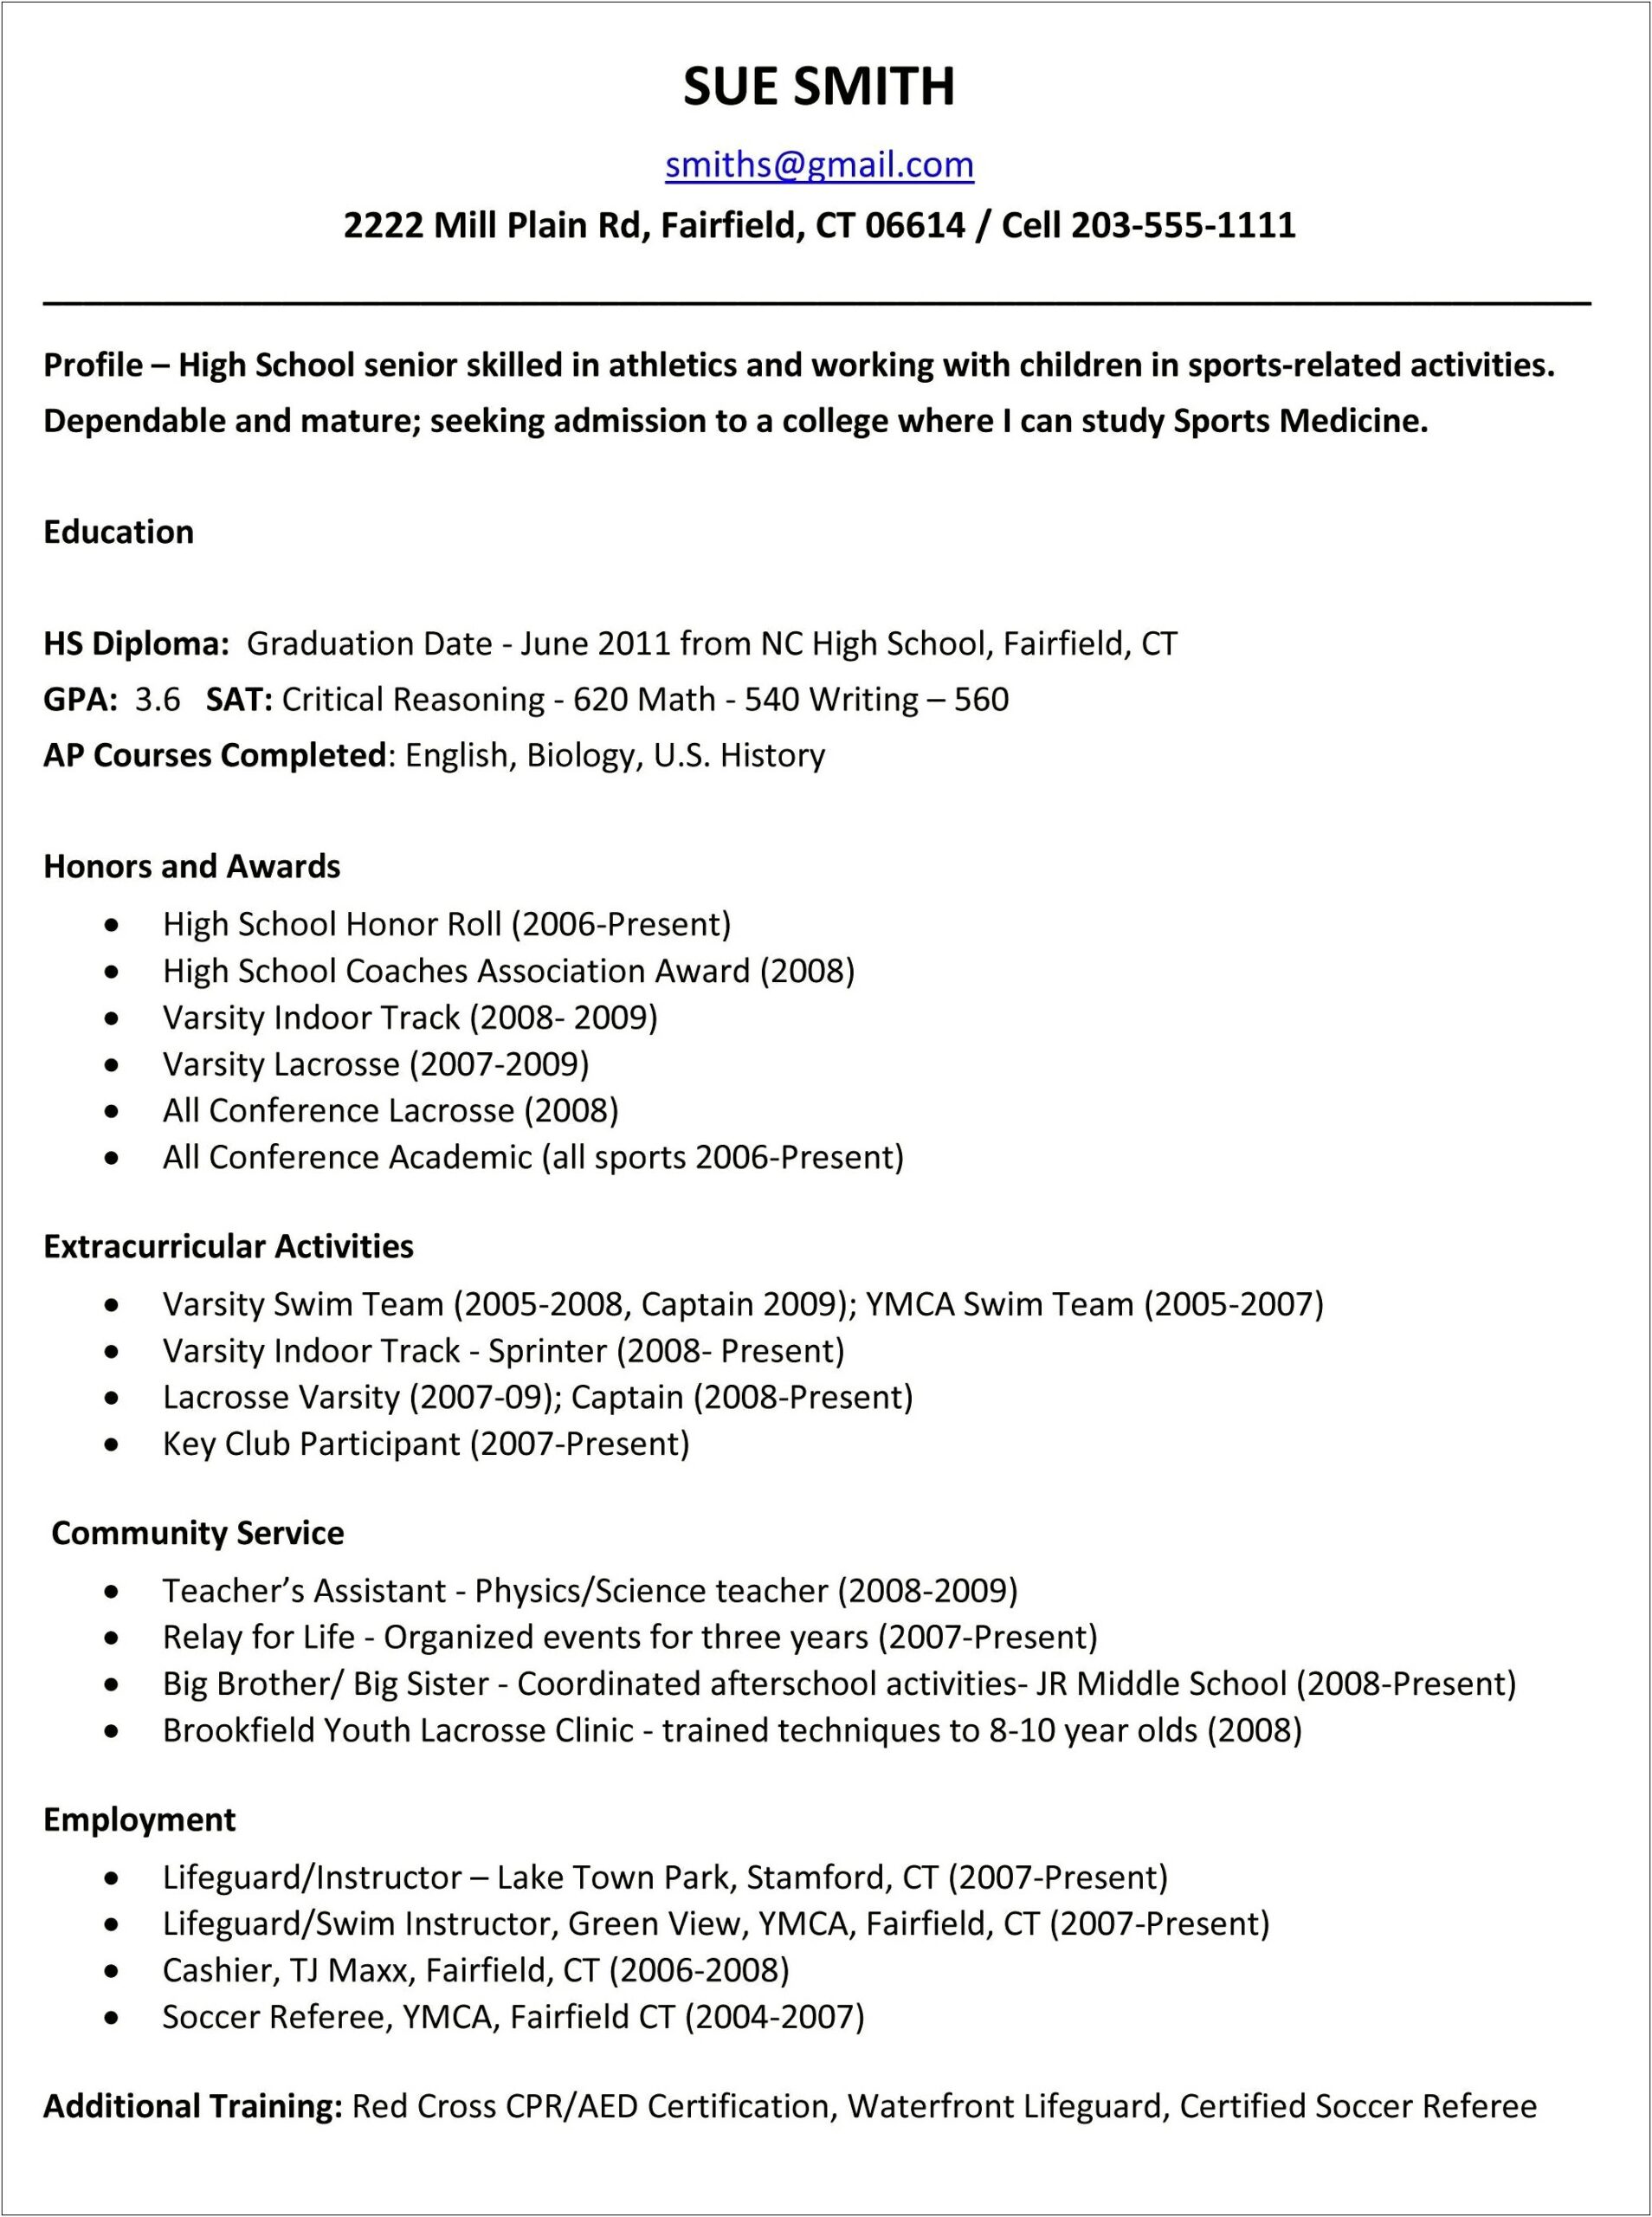 Fill In Resume Template For High School Students